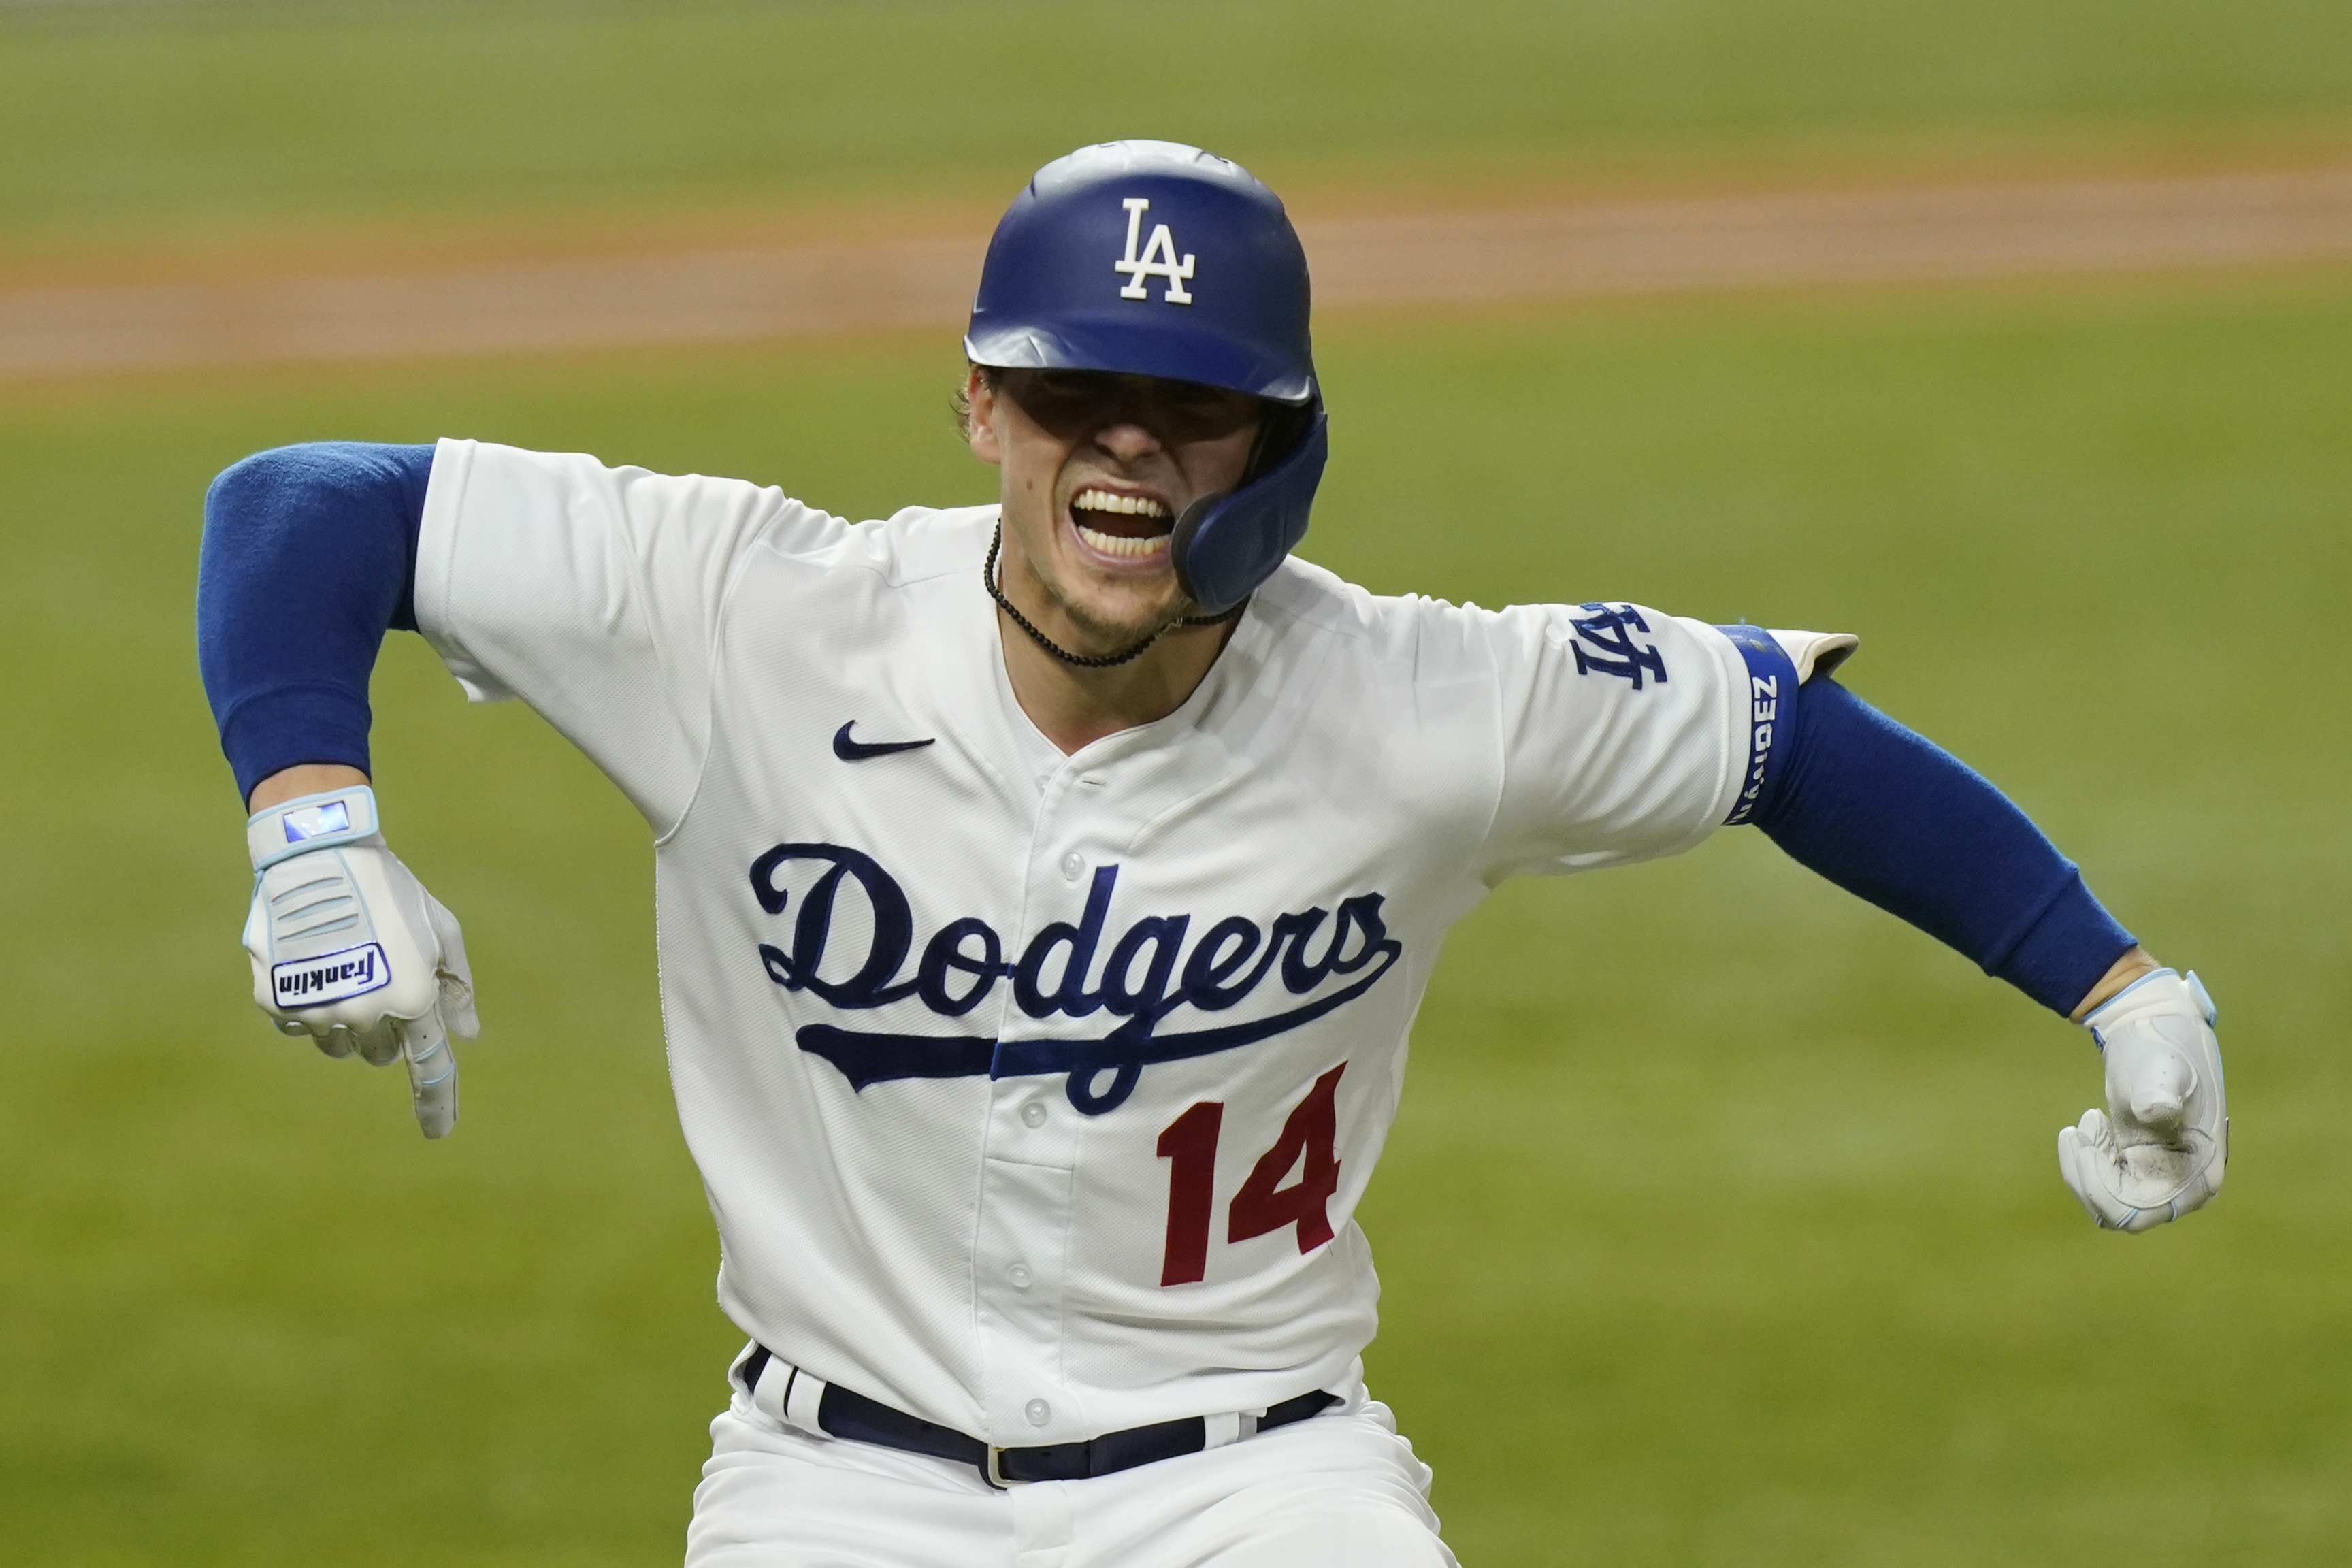 Boston Red Sox announce two-year deal with Kiké Hernandez, who